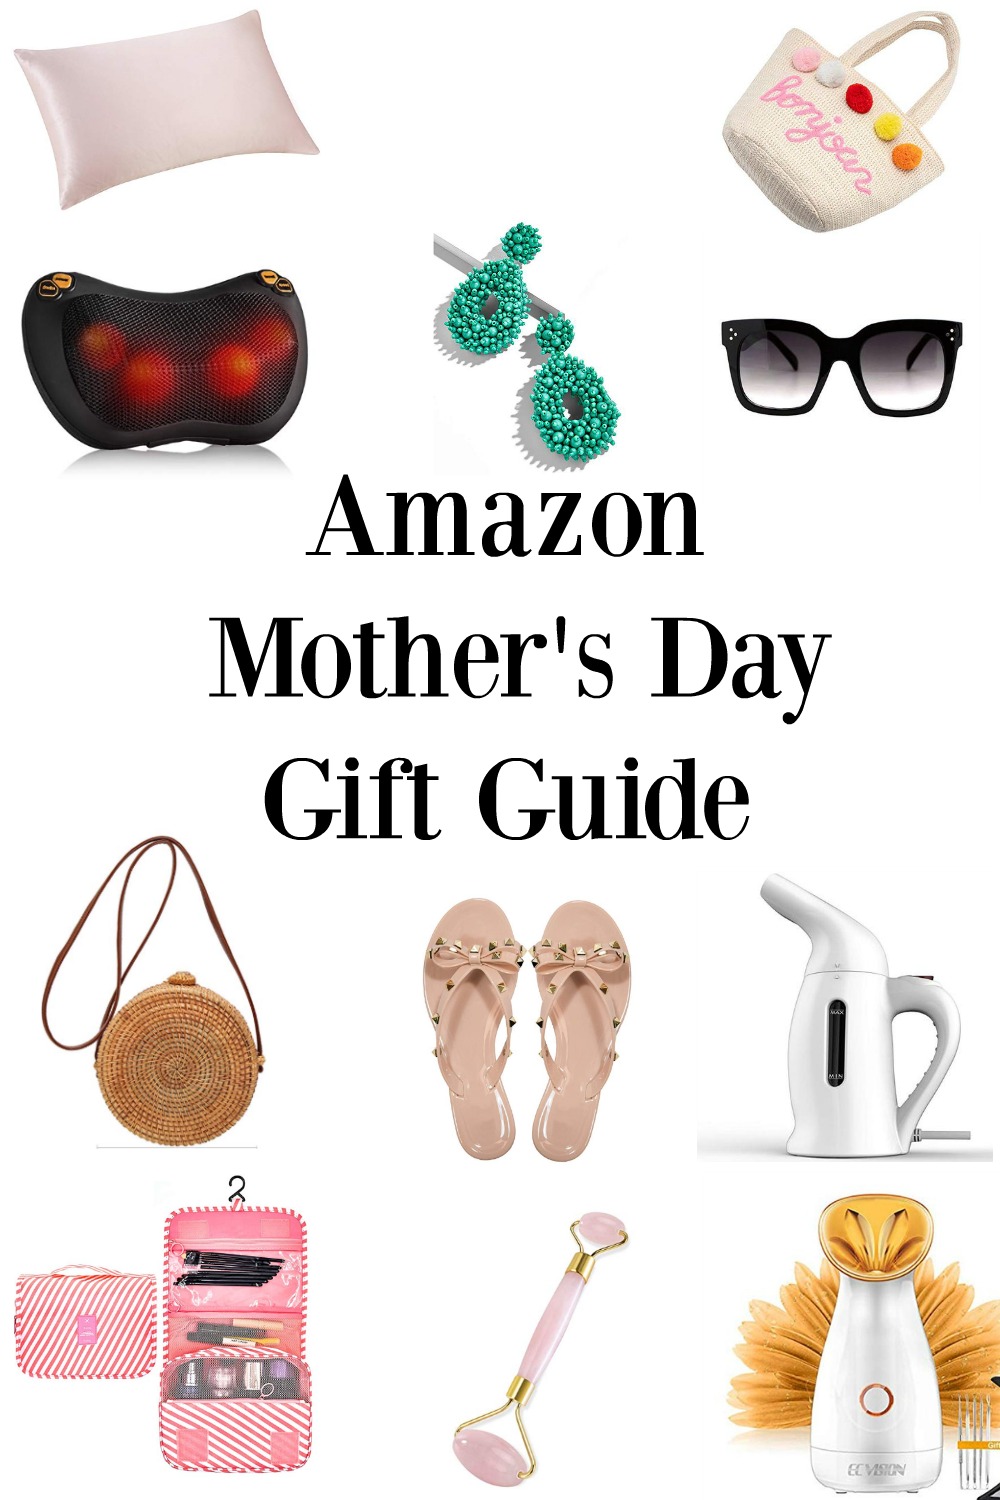 Amazon Mother's Day Gift Guide Daily Dose of Style